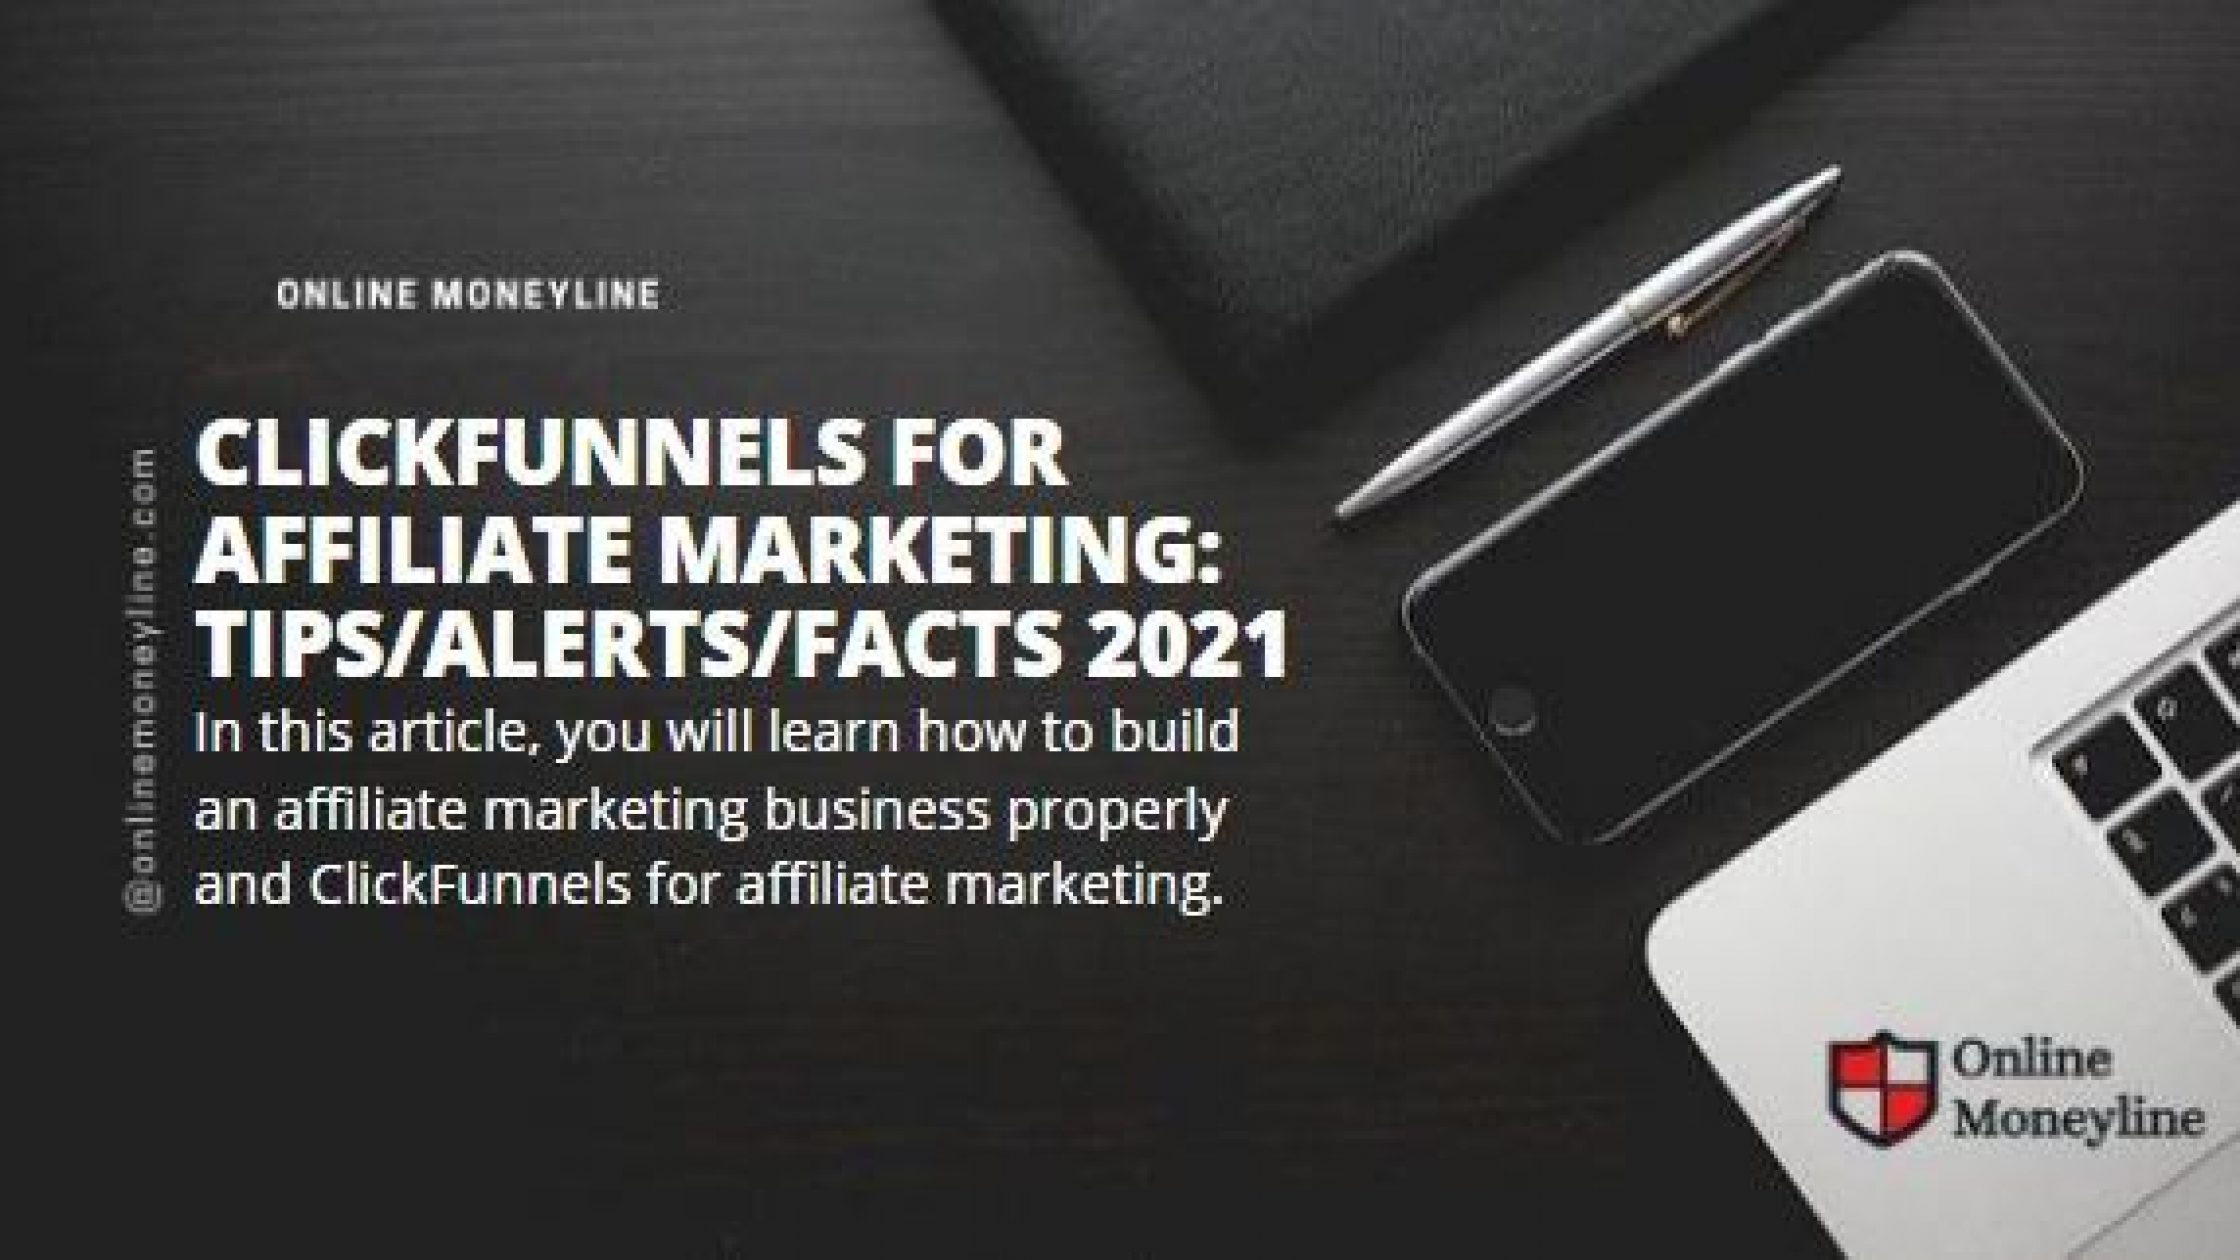 ClickFunnels for Affiliate Marketing: Tips/Alerts/Facts 2021